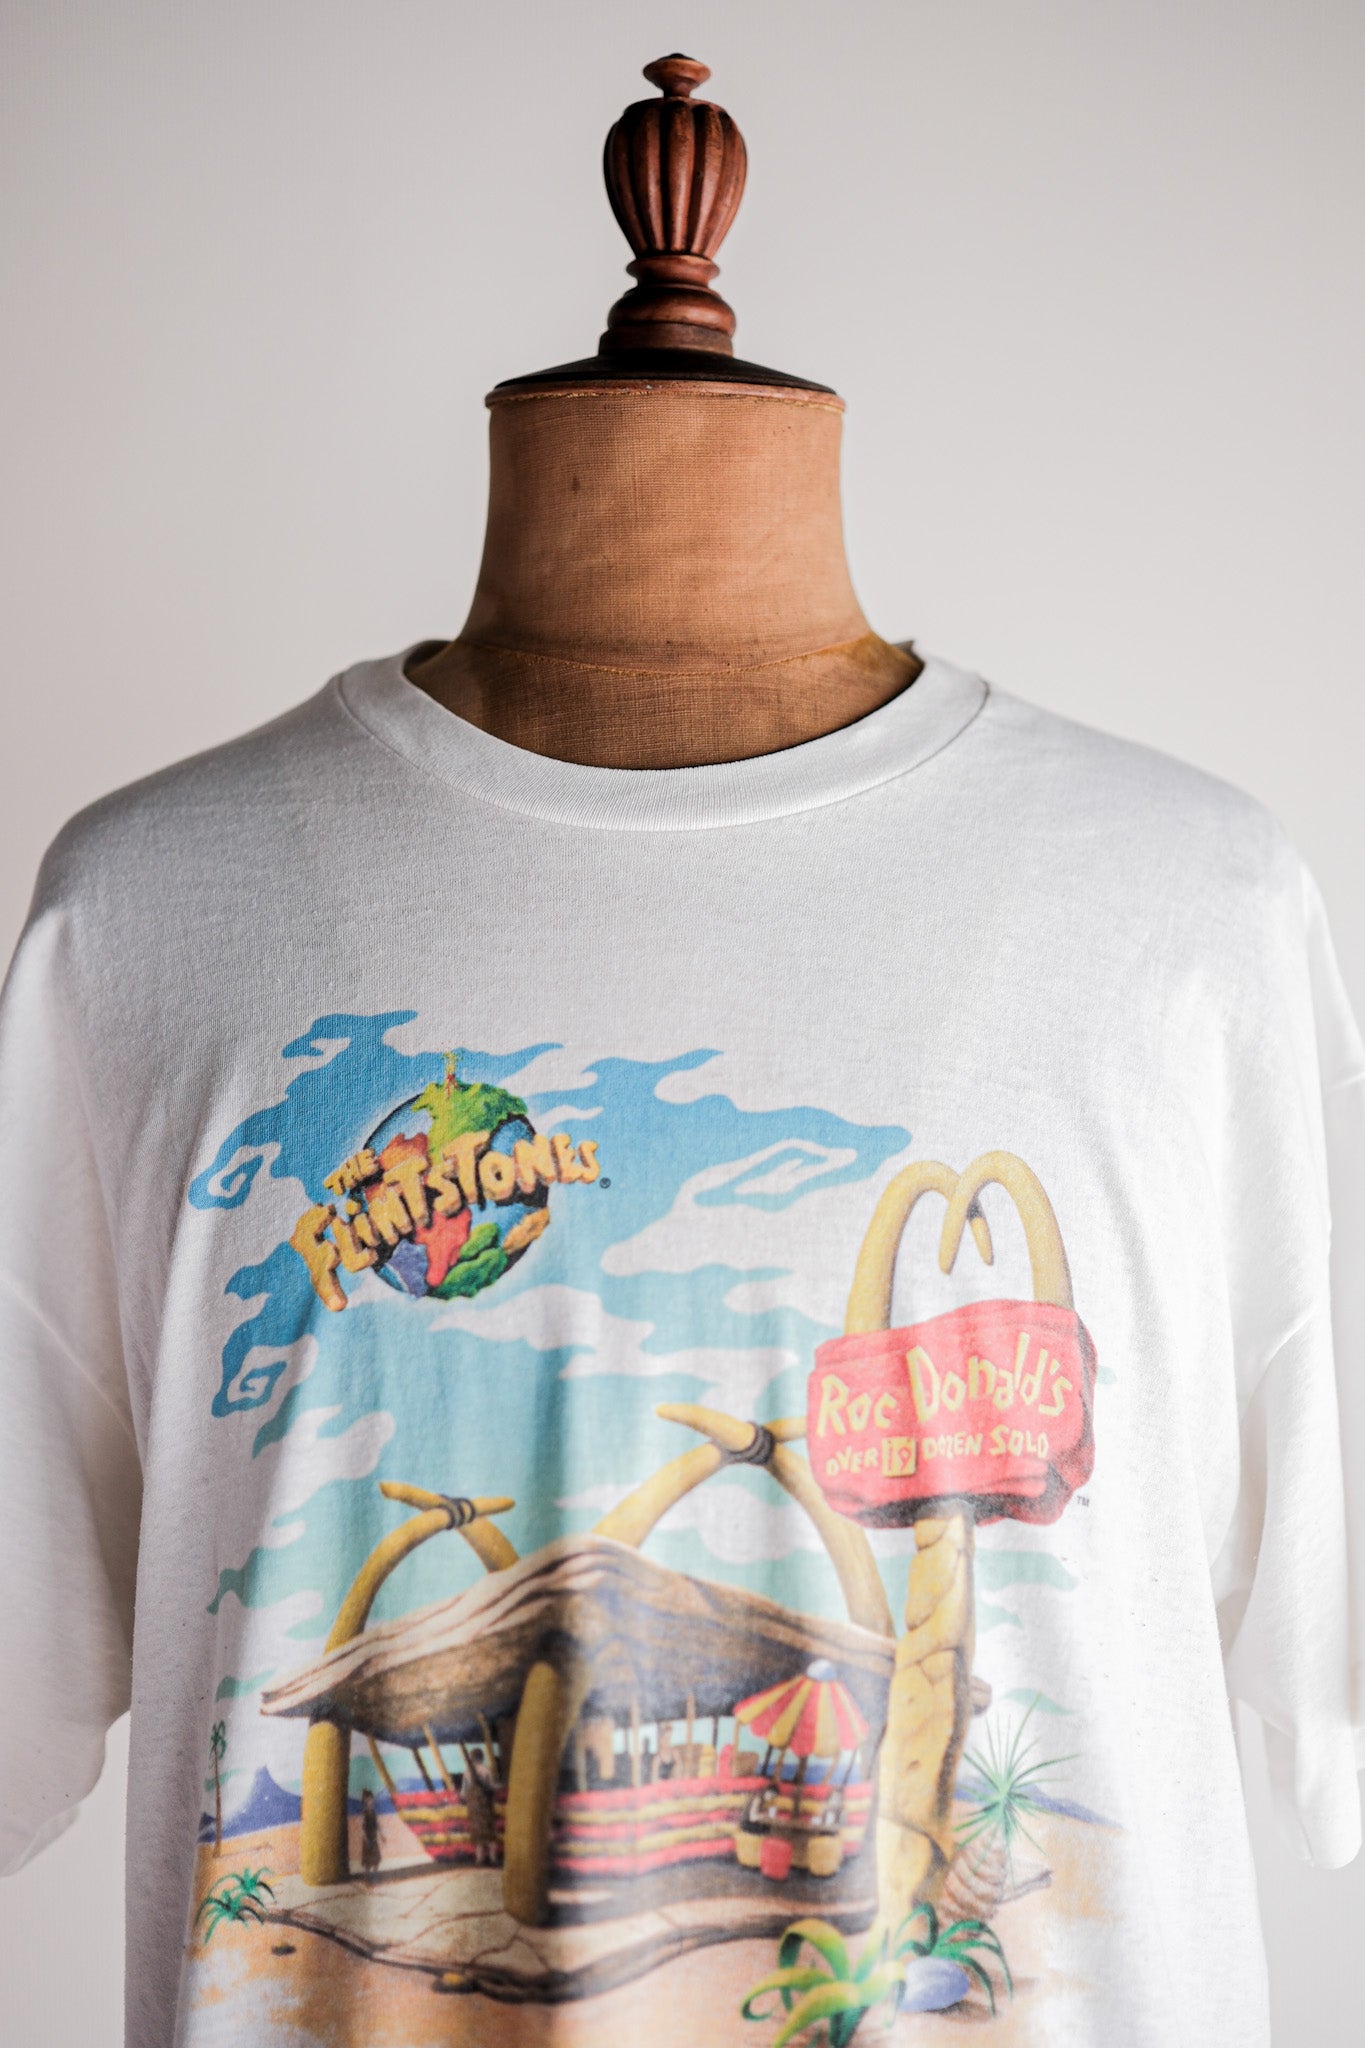 【~90's】Vintage Movie Print T-shirt Size.XL "The Flintstones" "Made in U.S.A."